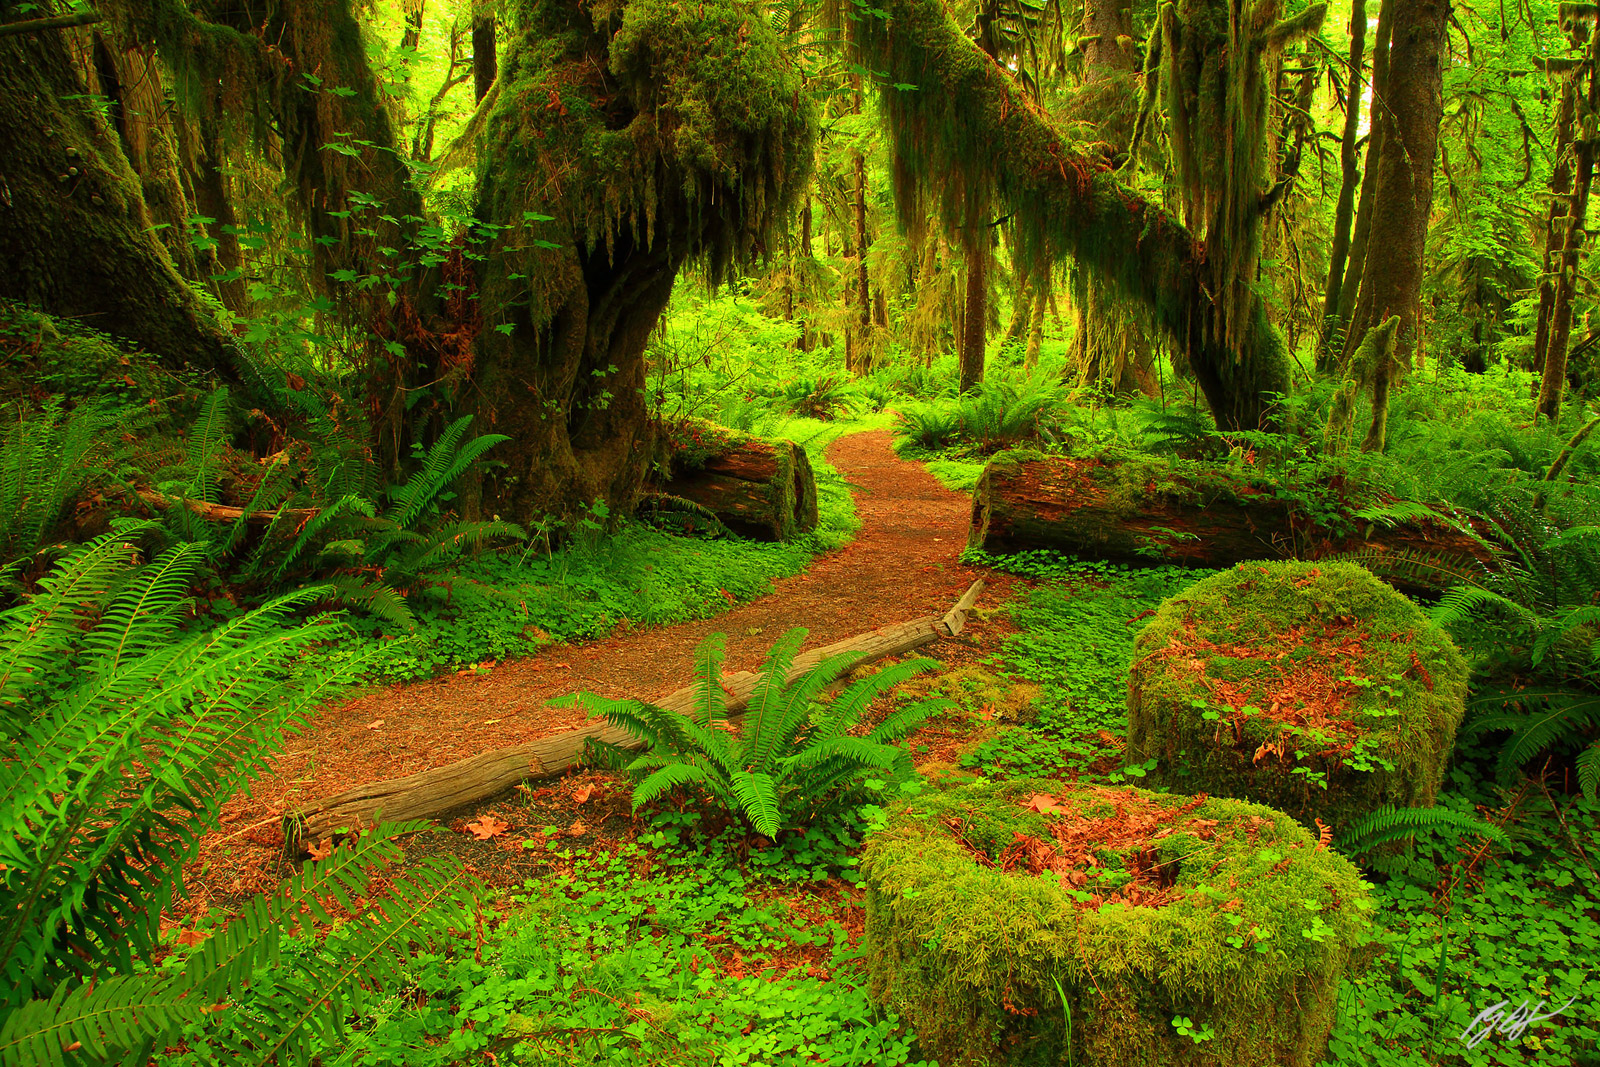 Maple Glade trail in the Quinault Rainforest in Olympic National Park in Washington